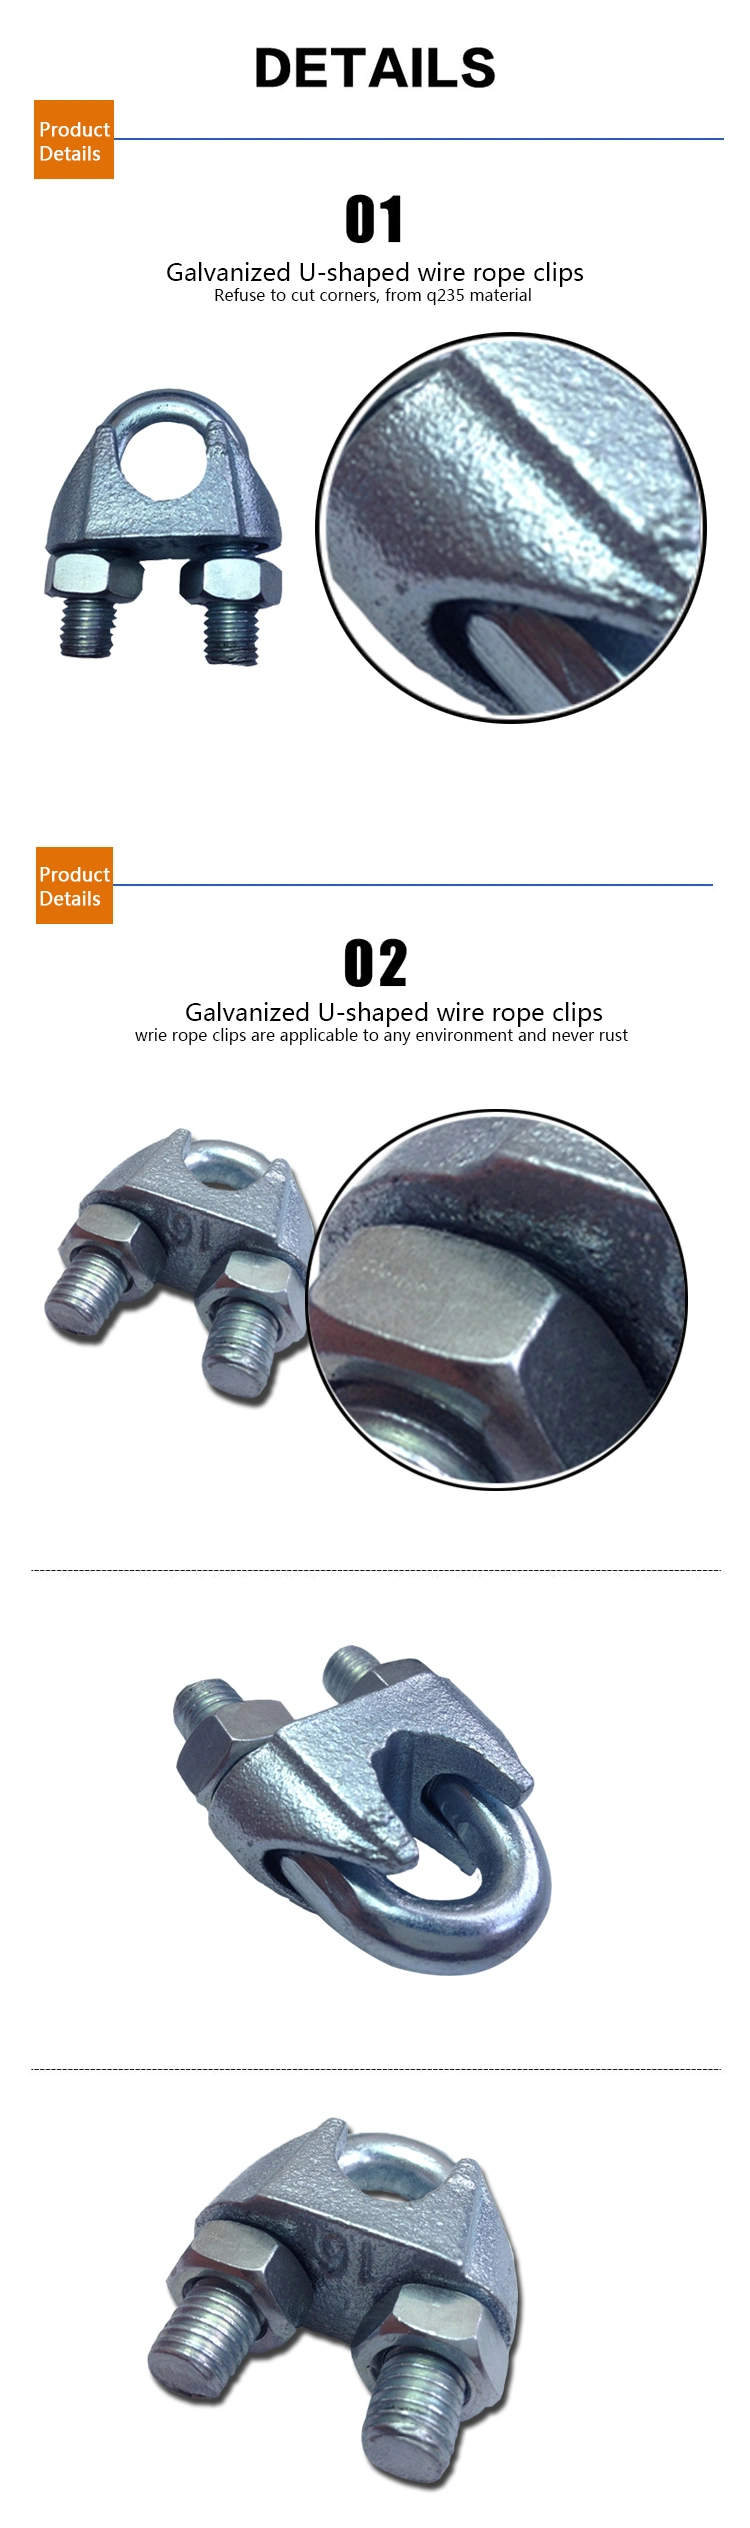 DIN741 Wire Rope Clip Manufacturer DIN741 Wire Rope Clip